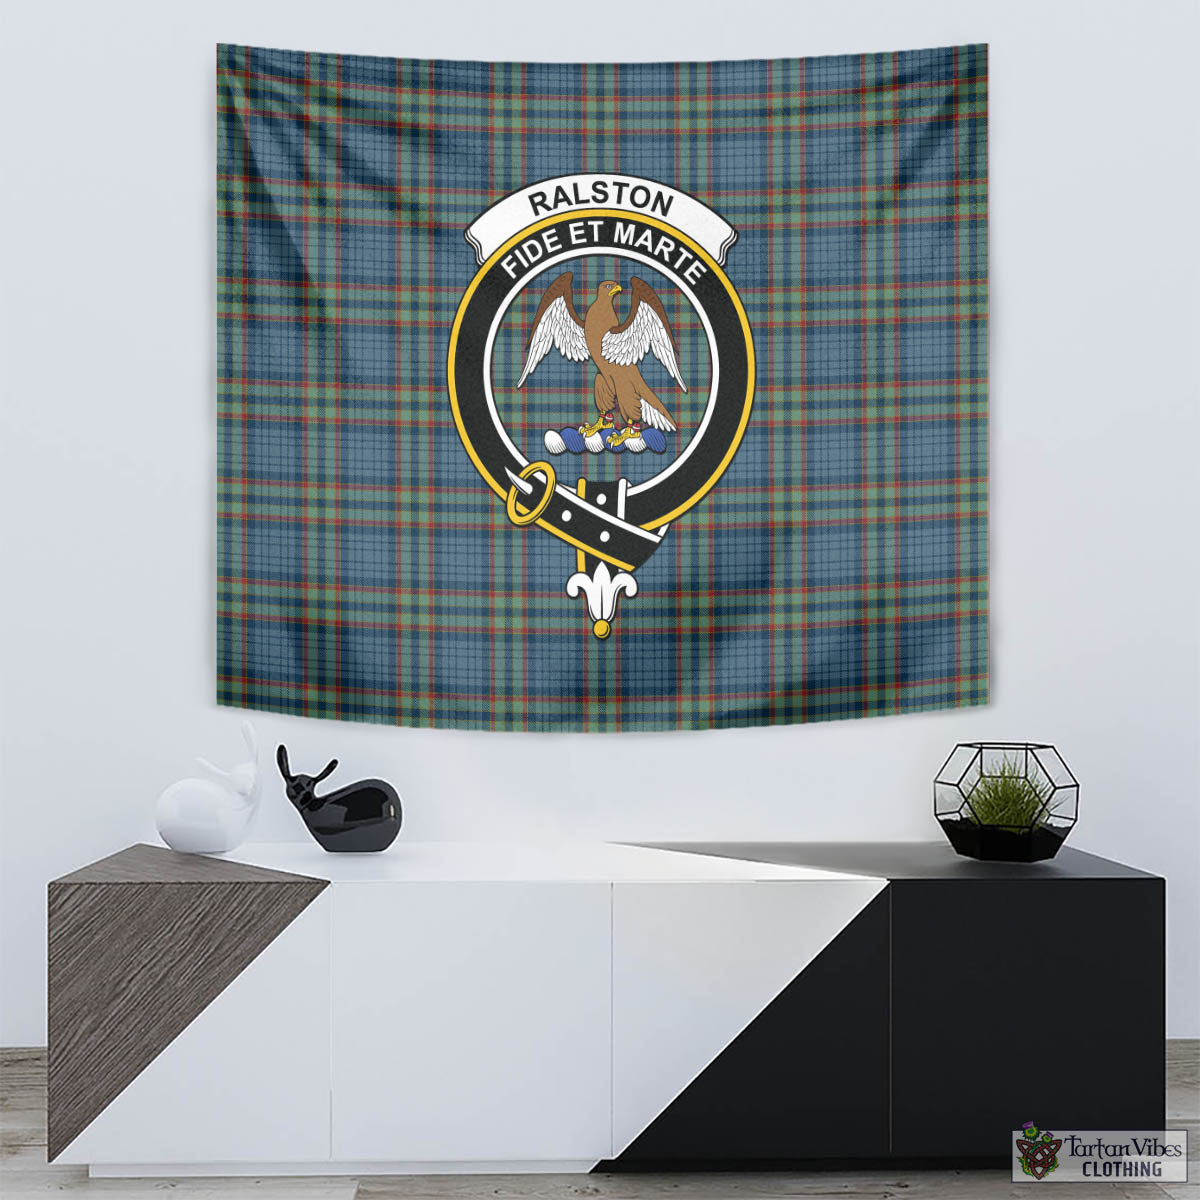 Tartan Vibes Clothing Ralston UK Tartan Tapestry Wall Hanging and Home Decor for Room with Family Crest